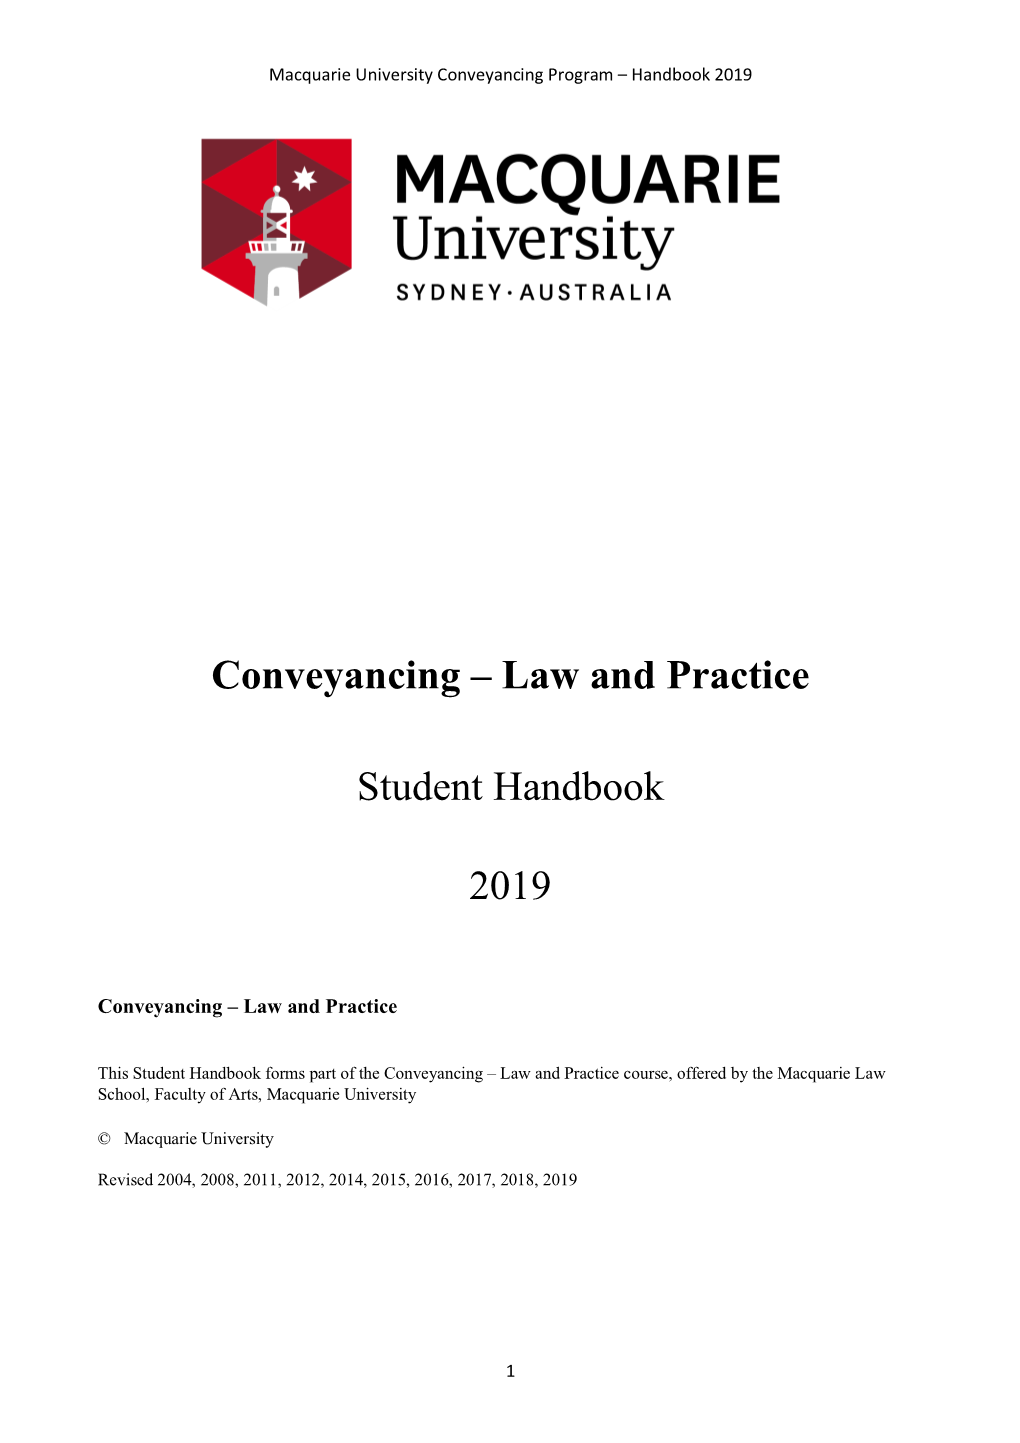 Conveyancing – Law and Practice Student